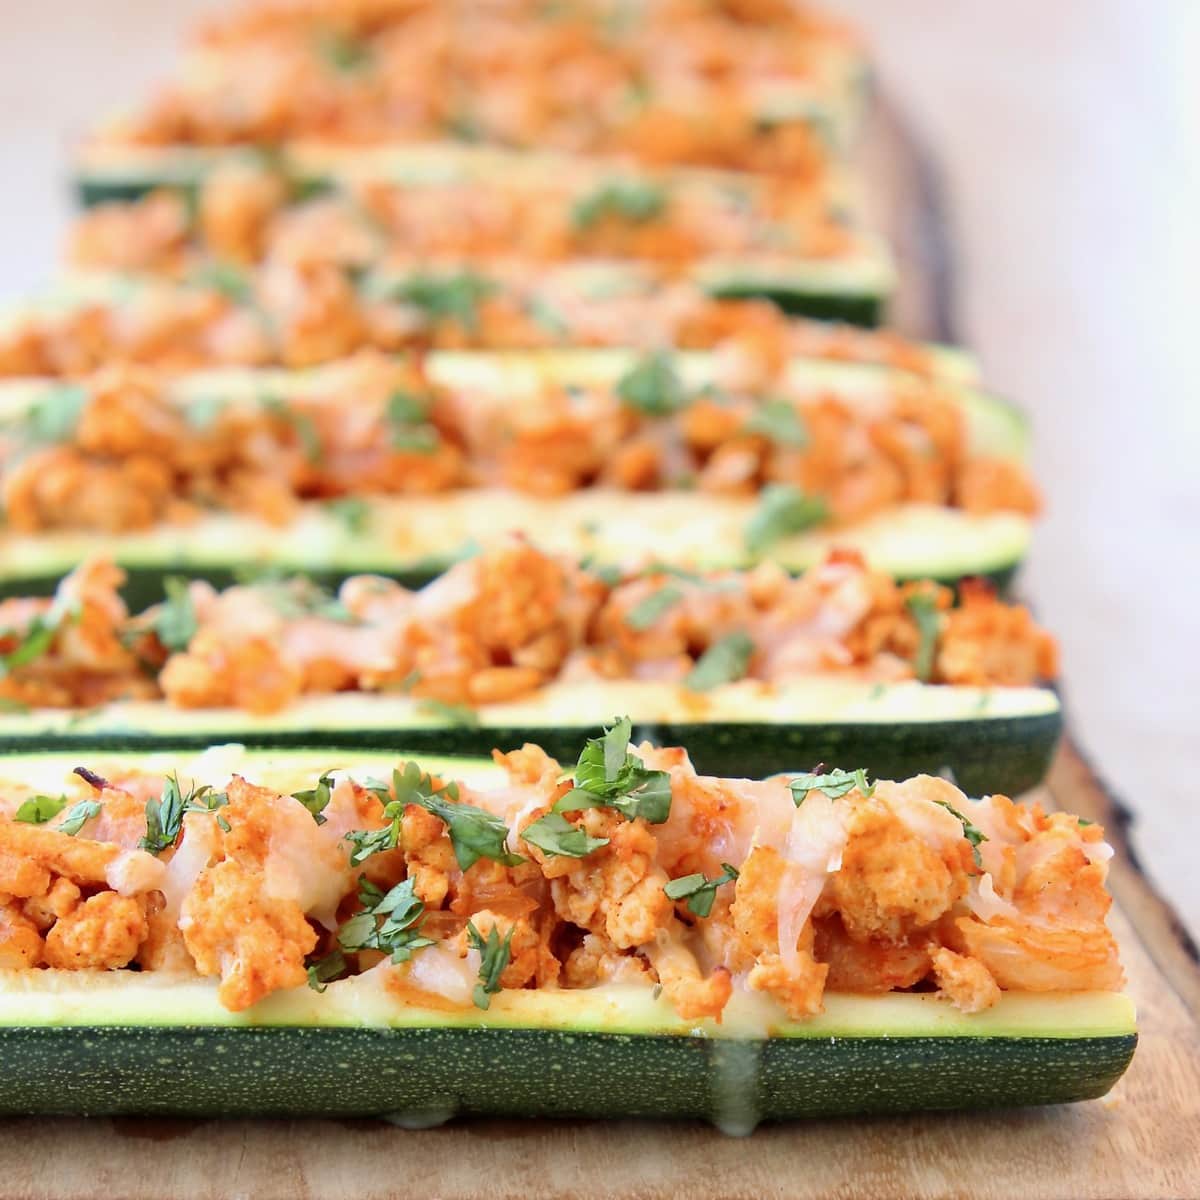 Buffalo Chicken Zucchini Boats with Pepper Jack Cheese and Cilantro on a wooden surface.